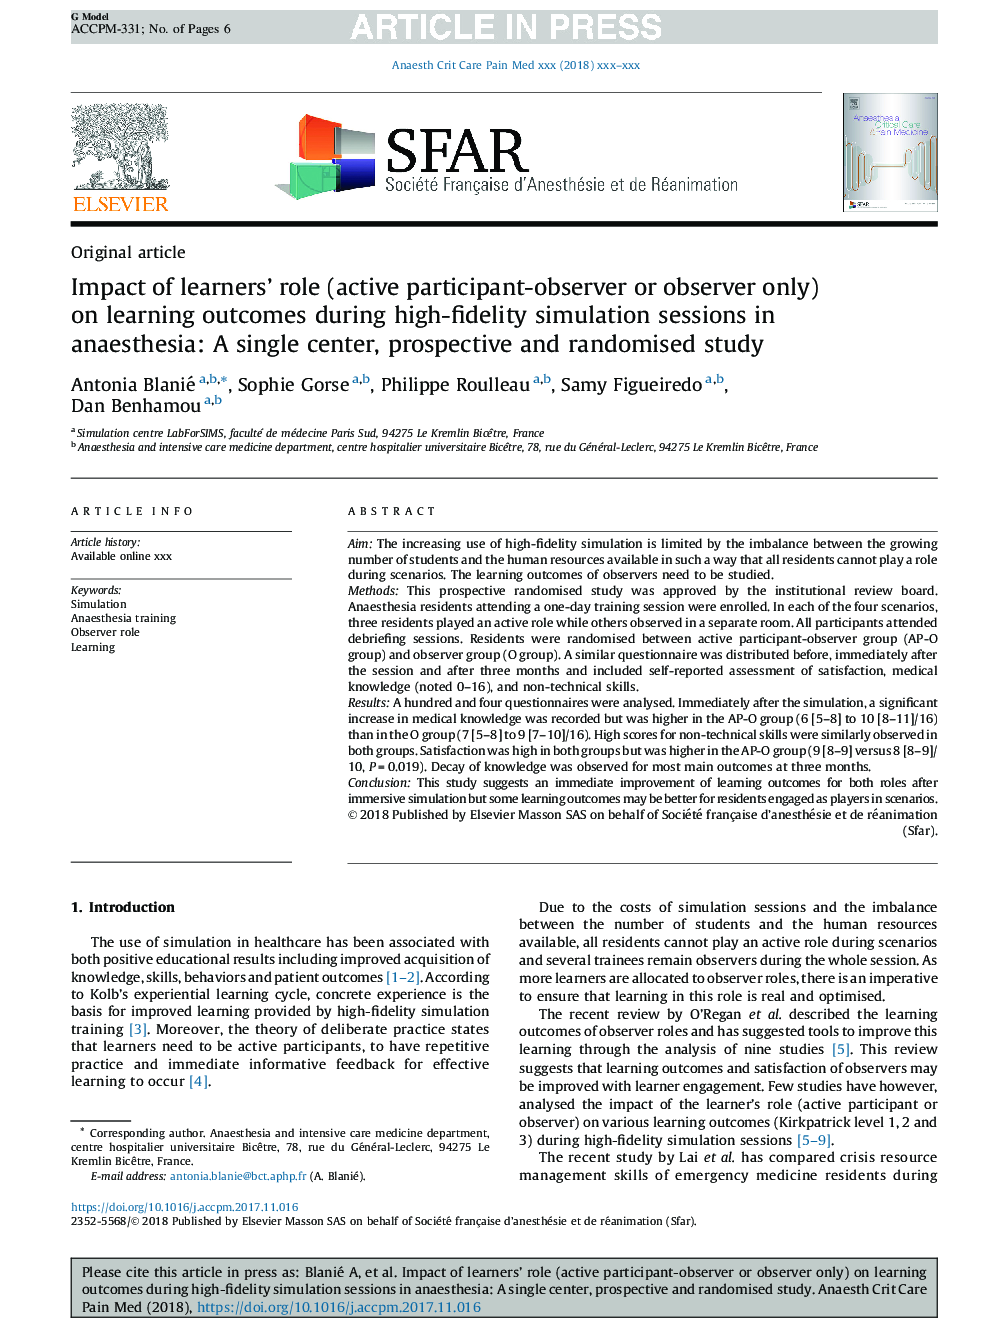 Impact of learners' role (active participant-observer or observer only) on learning outcomes during high-fidelity simulation sessions in anaesthesia: A single center, prospective and randomised study